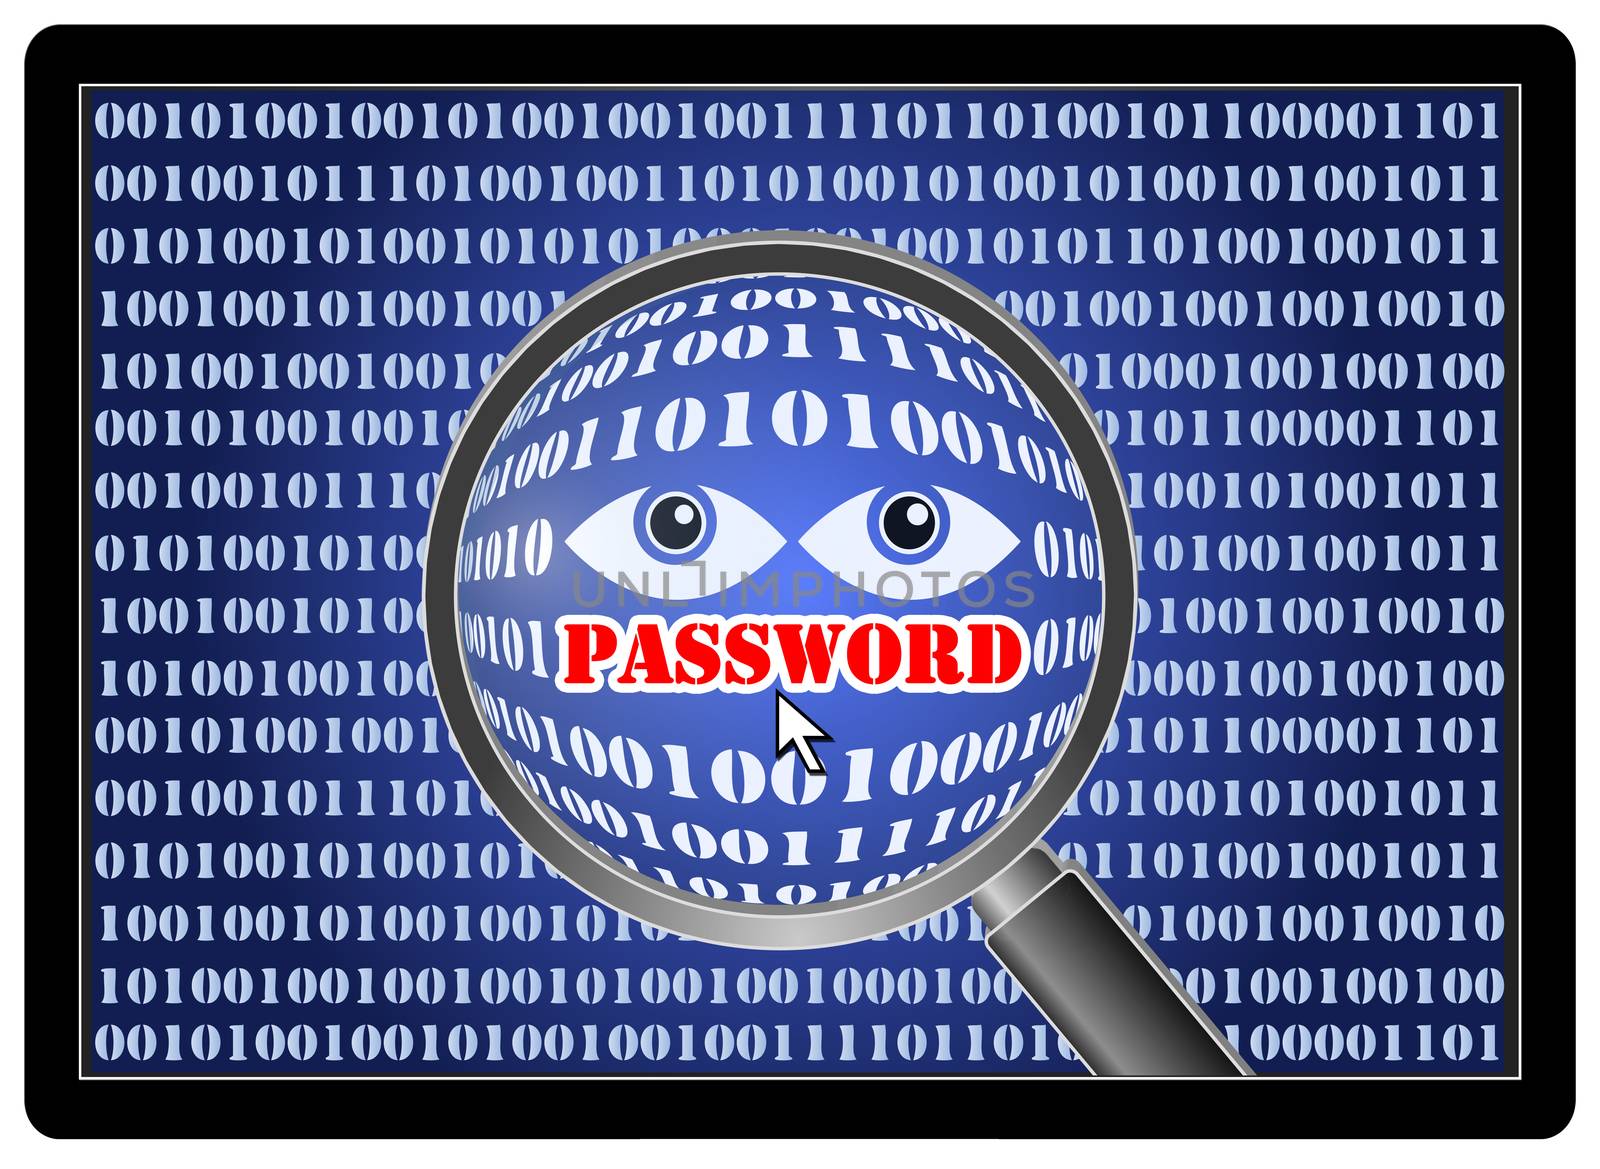 Software program to gain fraudulent access to confidential information like passwords